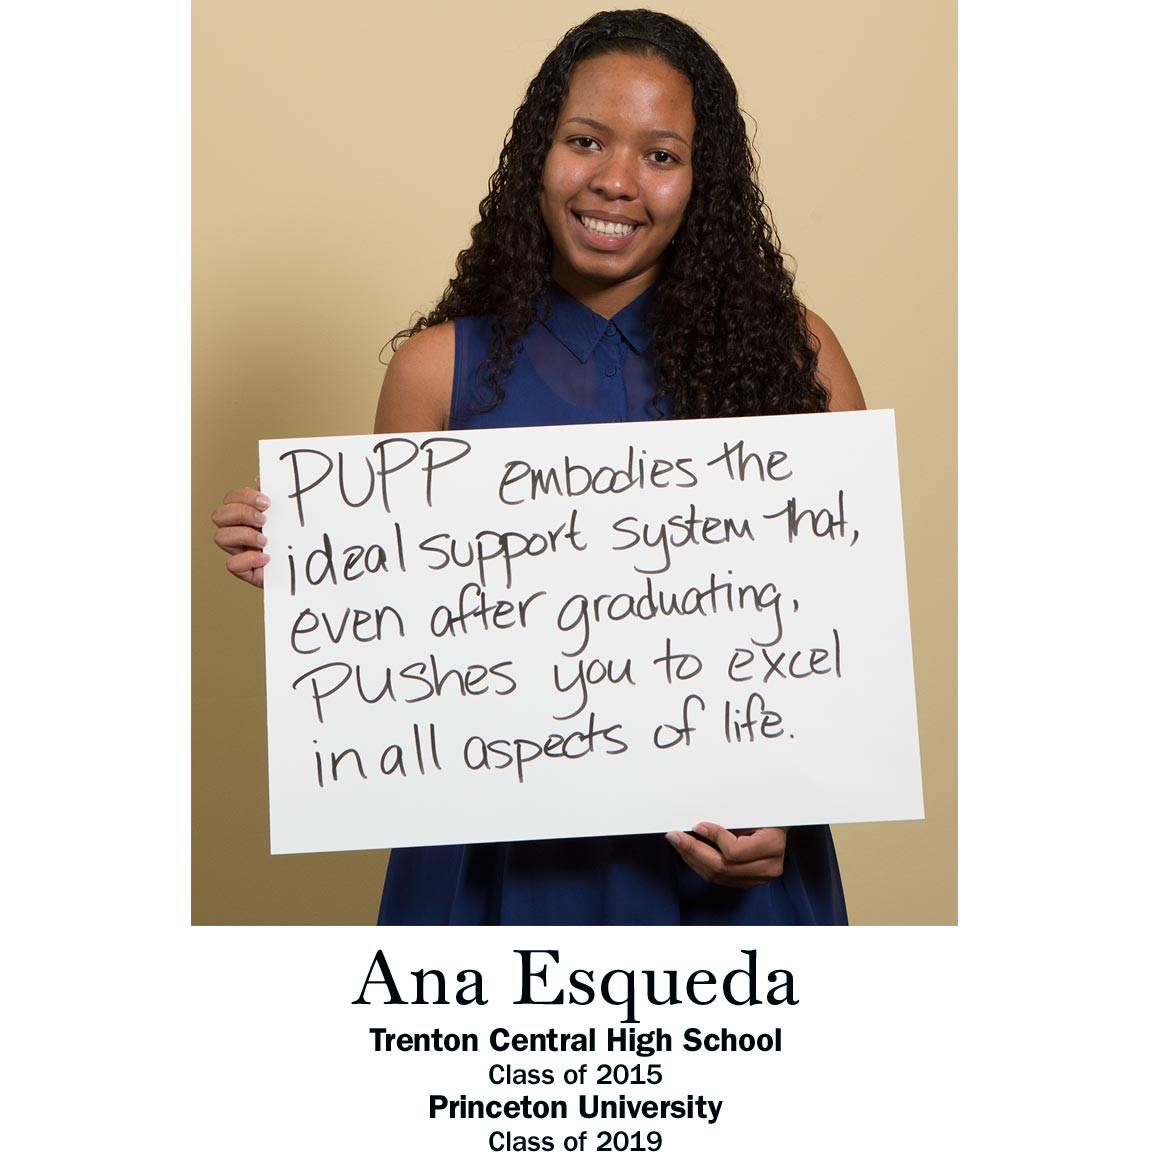 “PUPP embodies the ideal support system that, even after graduating pushes you to excel in all aspects of life.” Ana Esqueda, Trenton Central High School Class of 2015, Princeton University Class of 2019